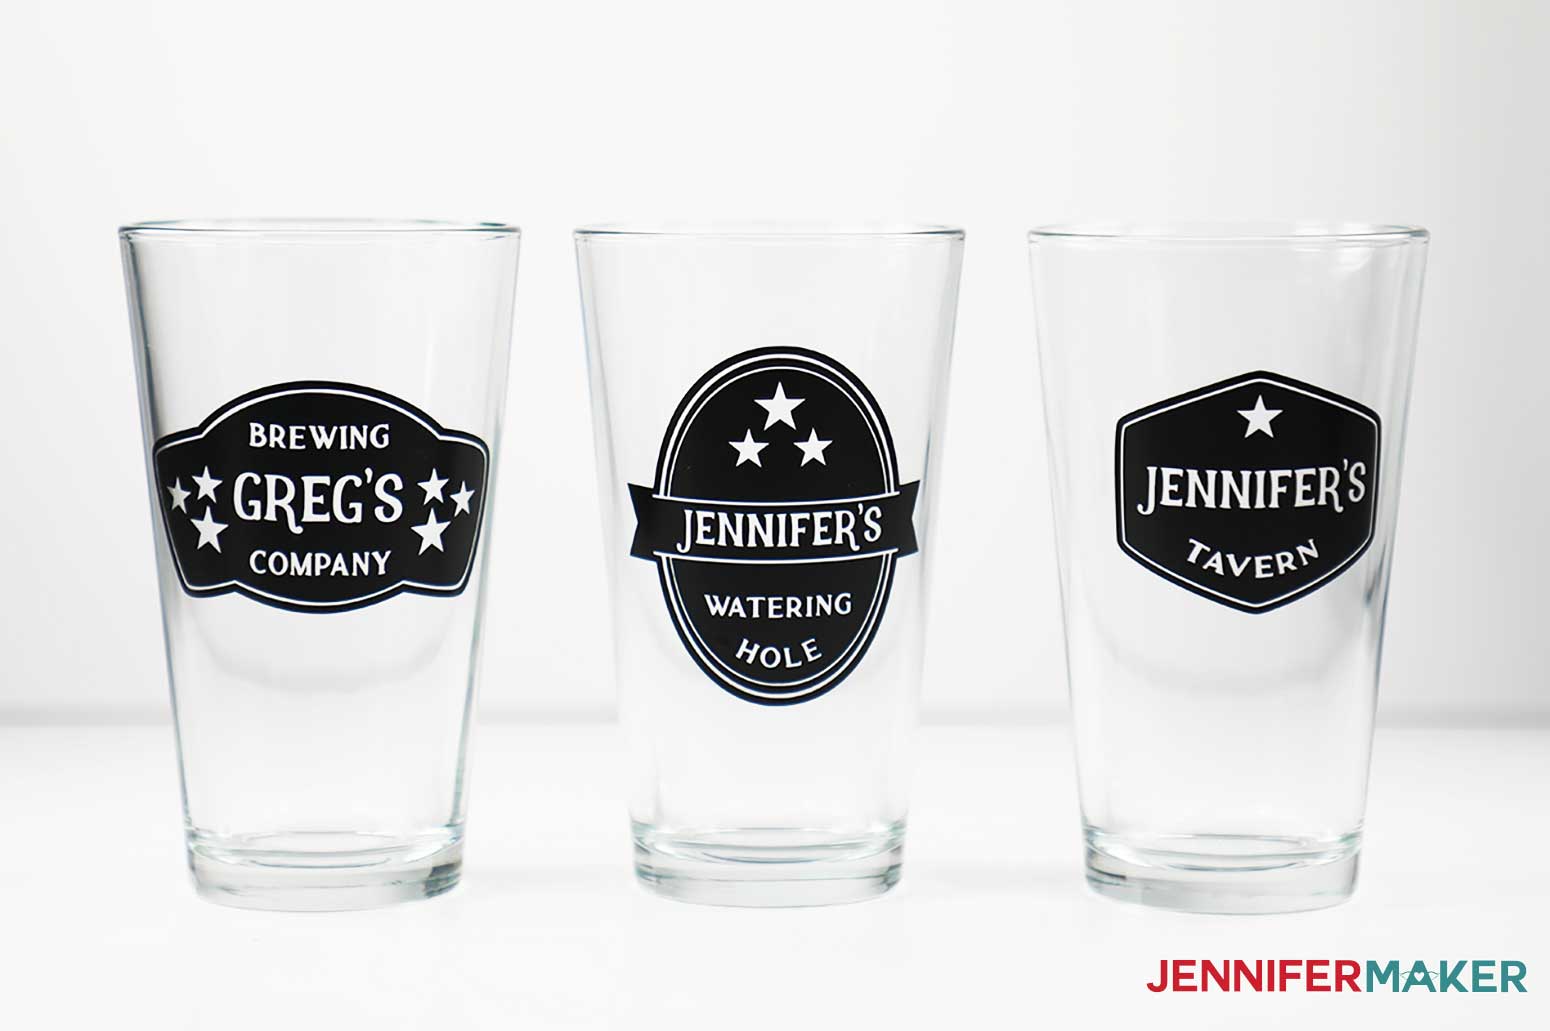 Customized decals on beer glasses